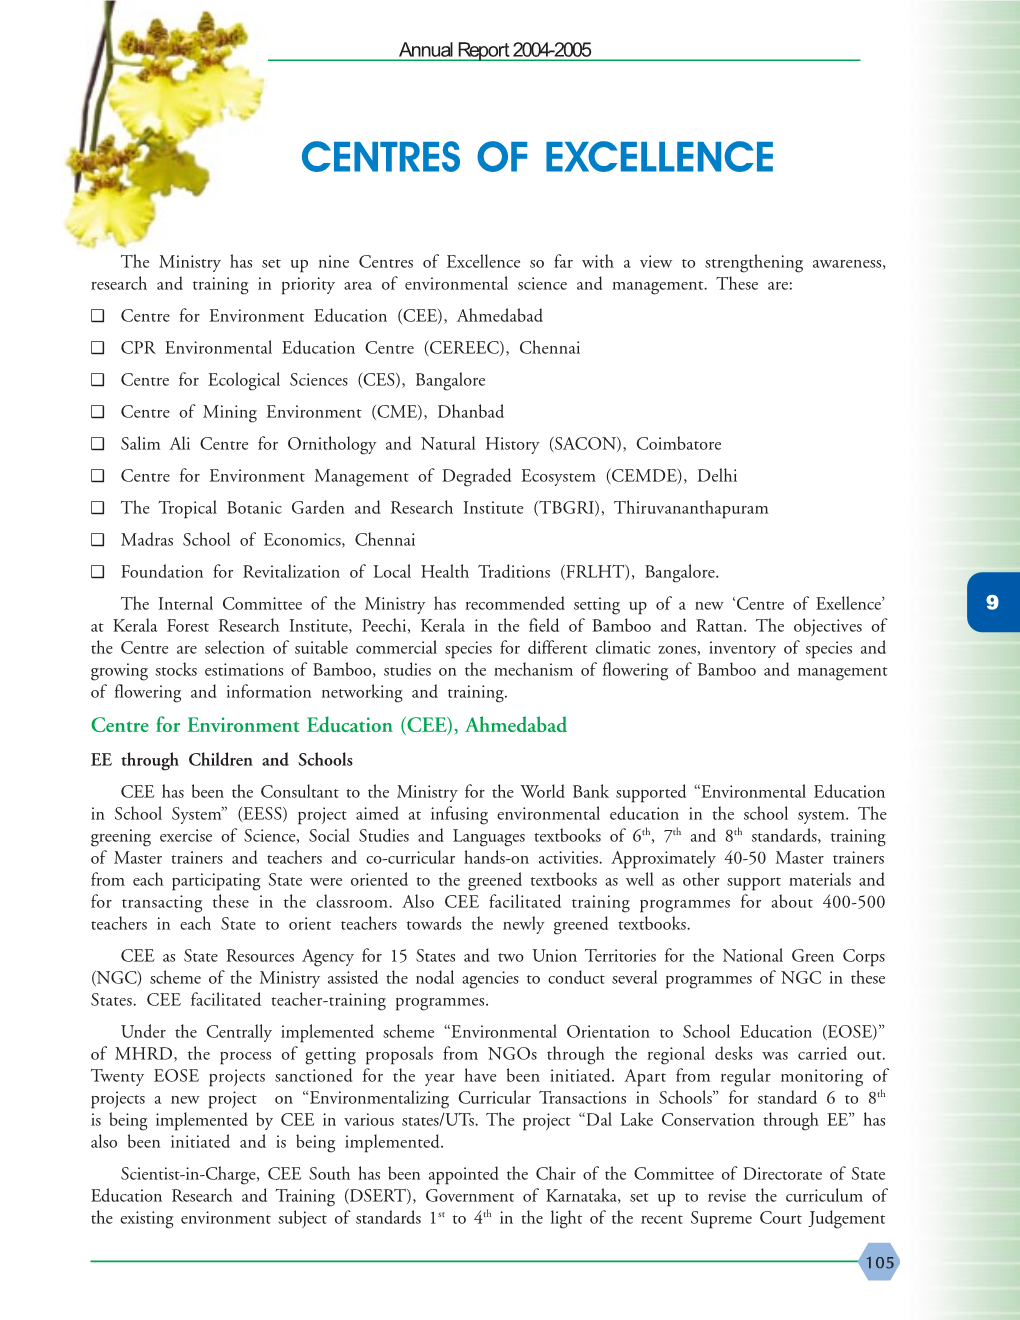 Centres of Excellence